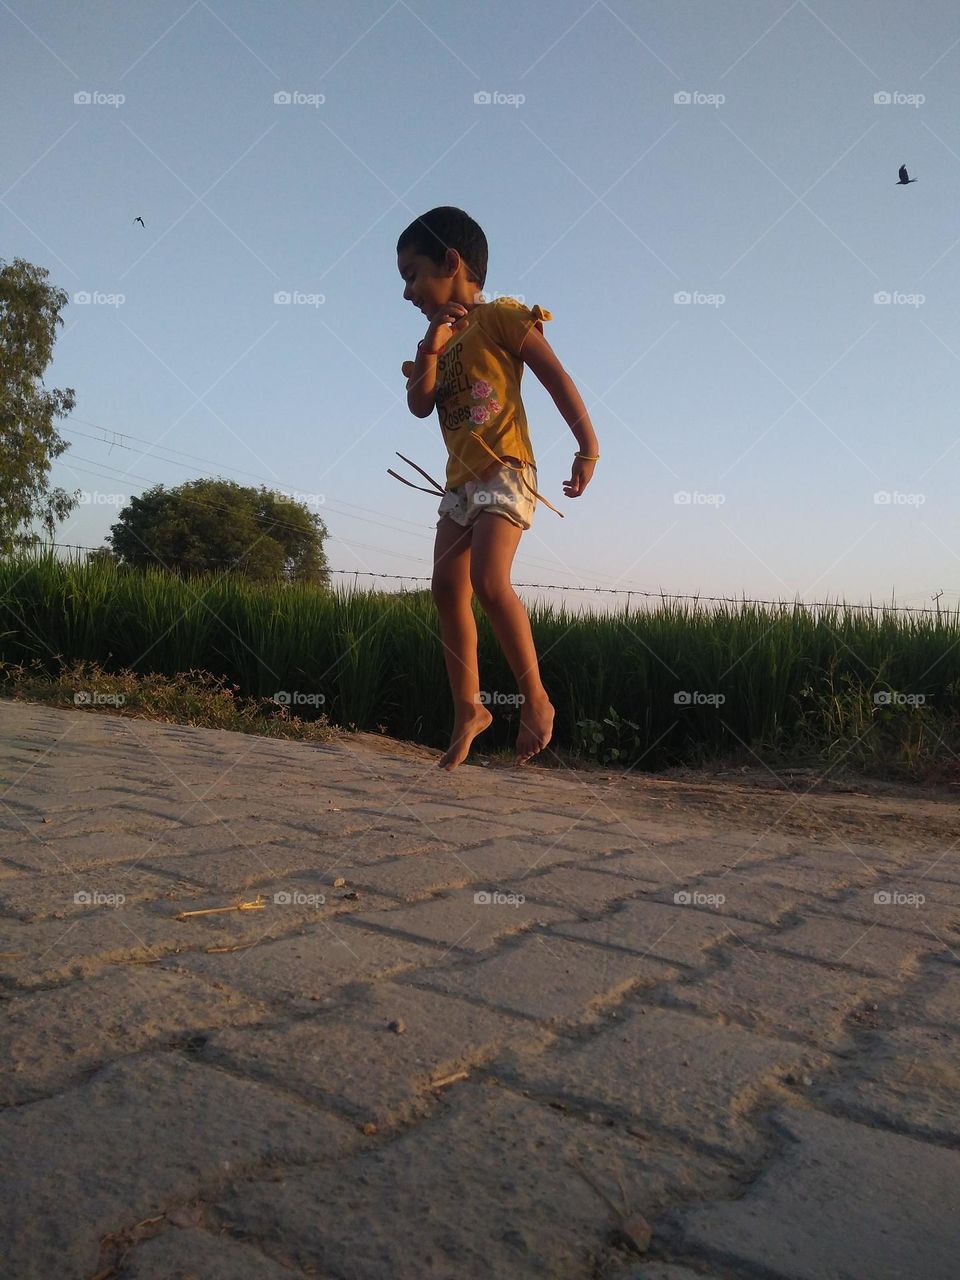 a girl jumping high without protection.